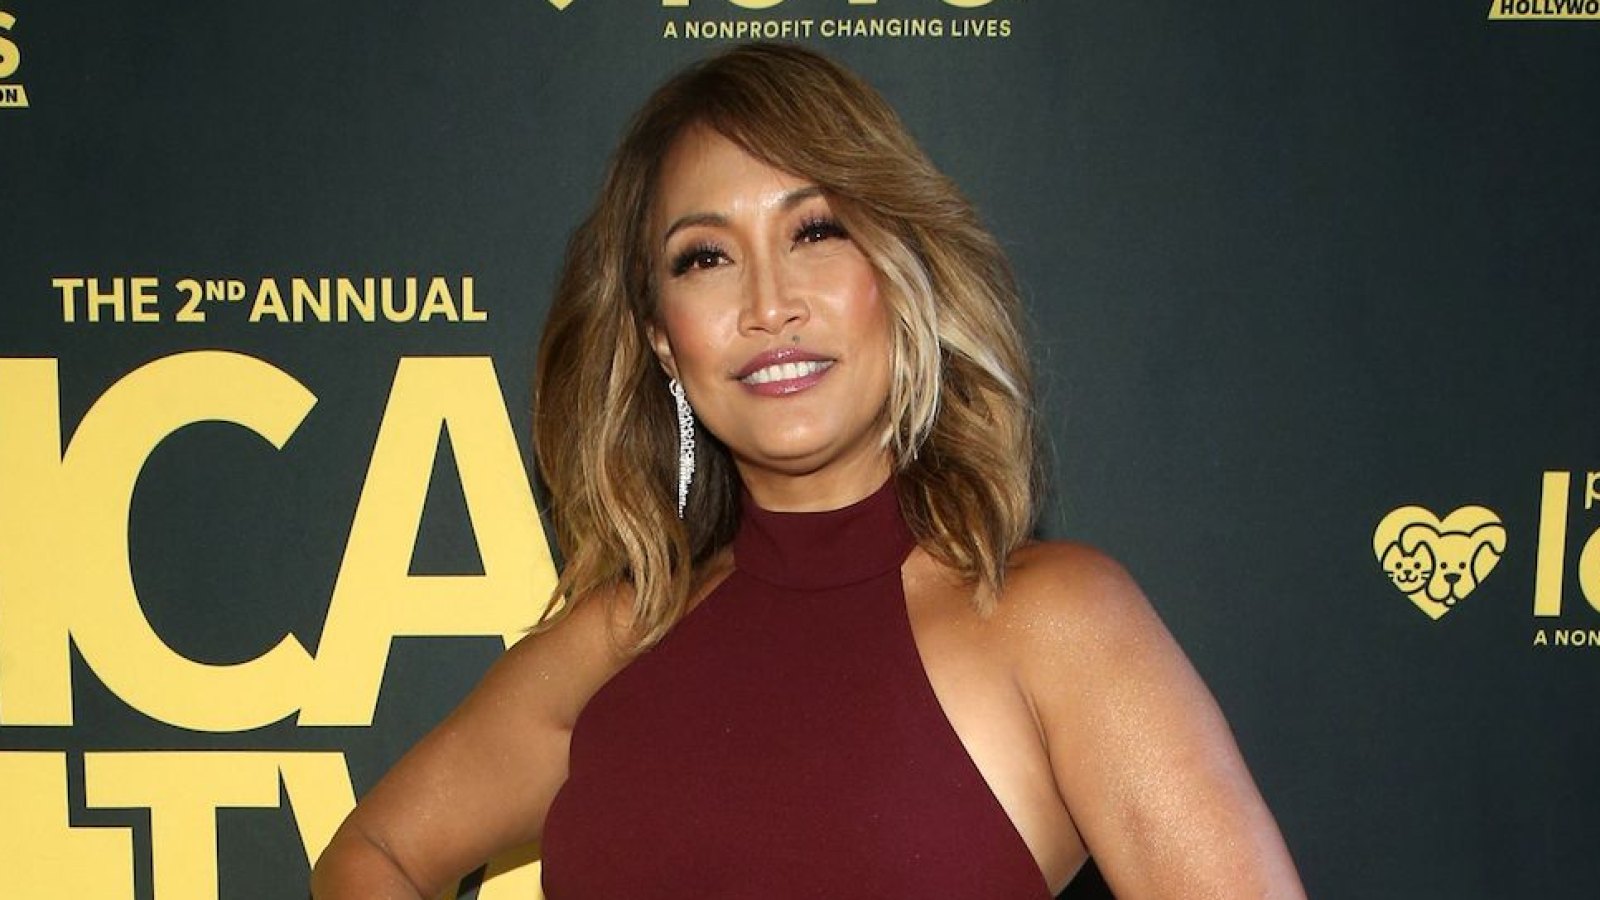 'Dancing With the Stars' Judge Carrie Ann Inaba Recovering After Emergency Appendectomy: 'Painful Experience'